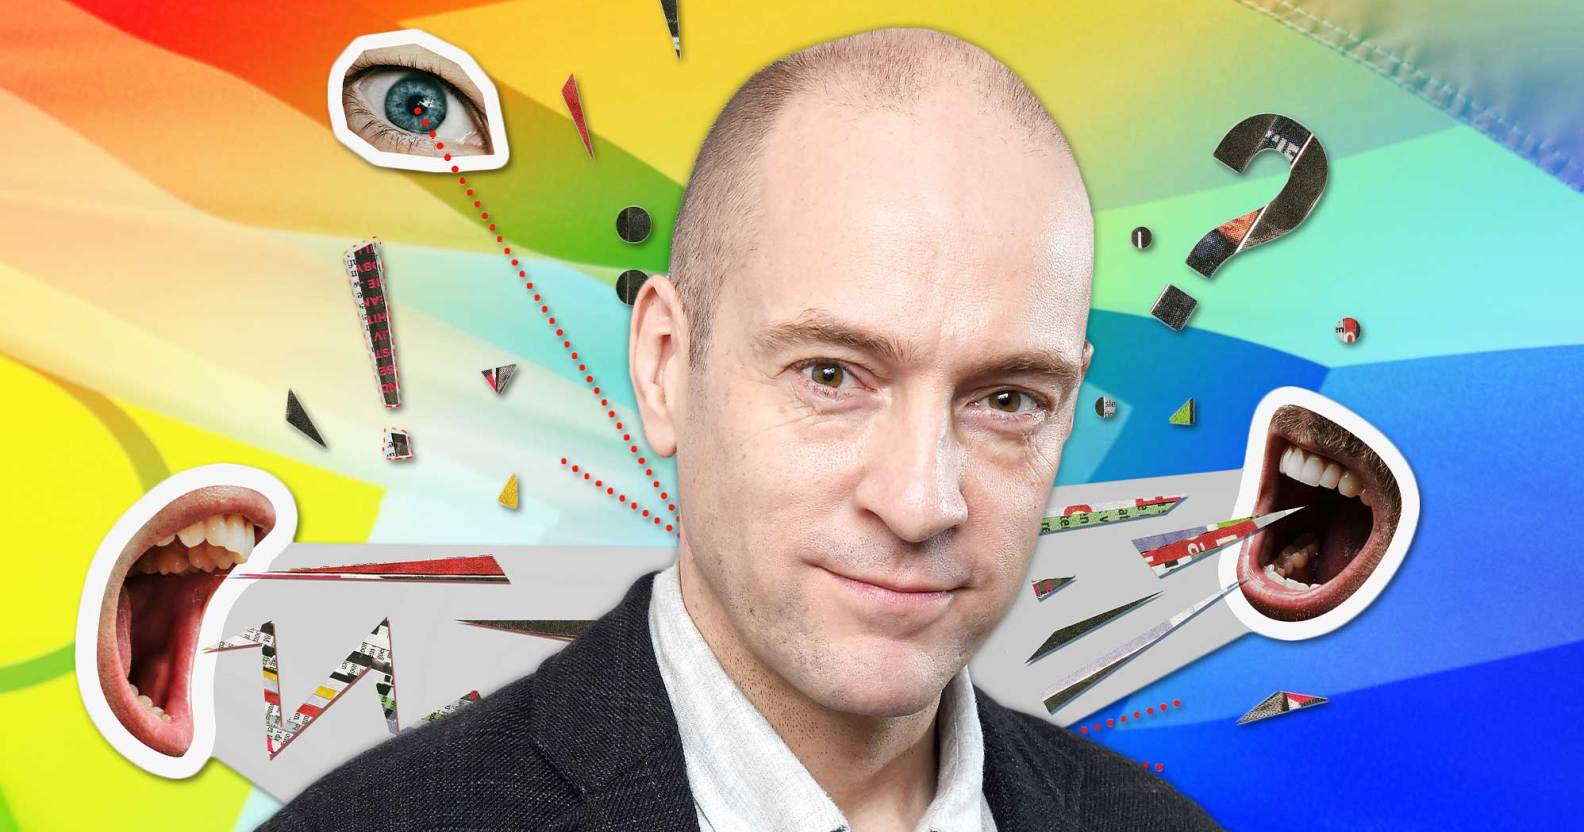 A graphic shows a cut-out image of magician Derren Brown surrounded by pictures of mouths shouting towards him and there's also a single eye looking at him. To the right of his head is a big question mark. The background is in rainbow Pride colours.